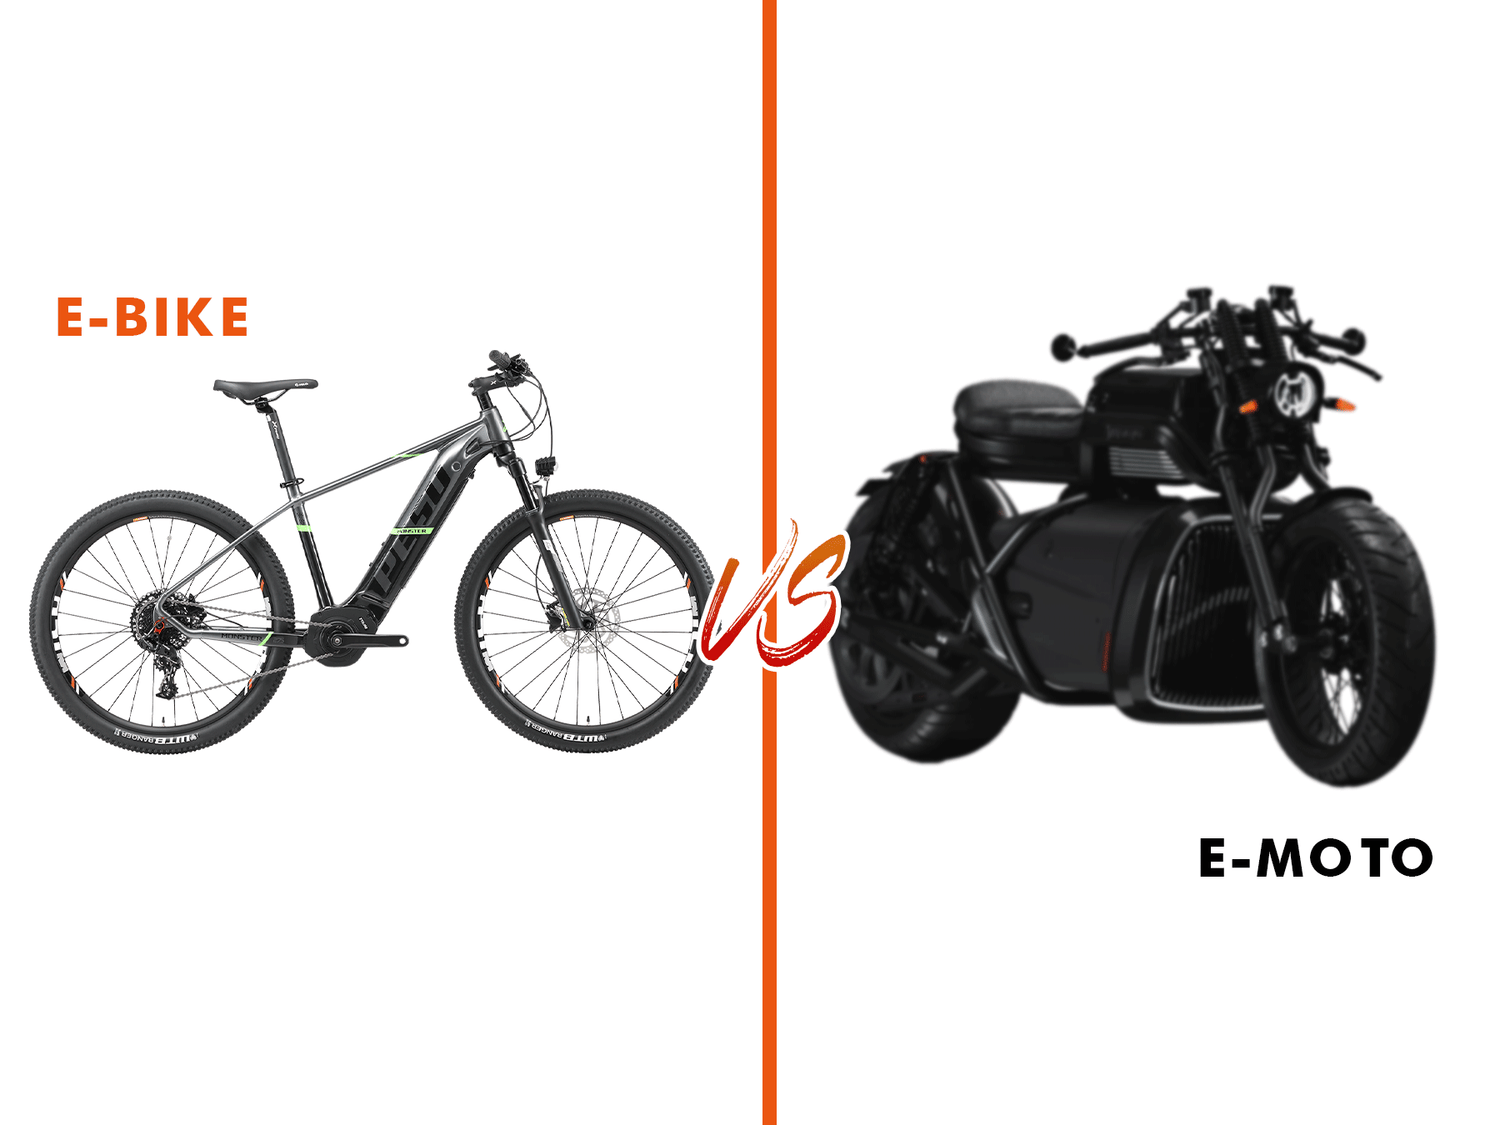 Which is better E-Bike or Electric Motorcycle?